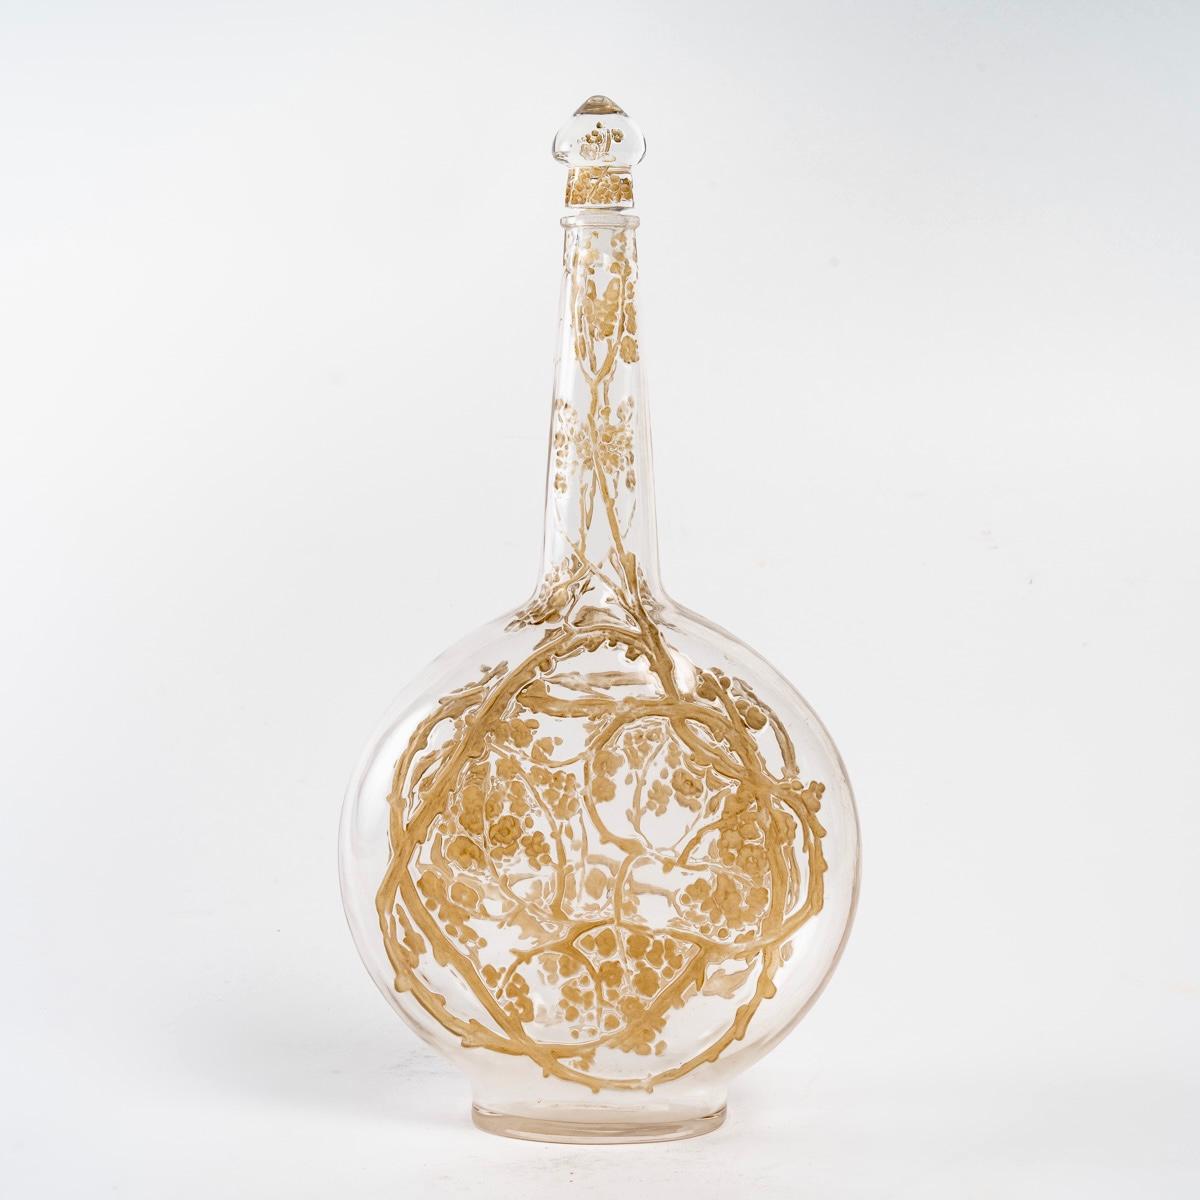 1914 René Lalique, Decanter Aubepines Clear Glass with Sepia Patina